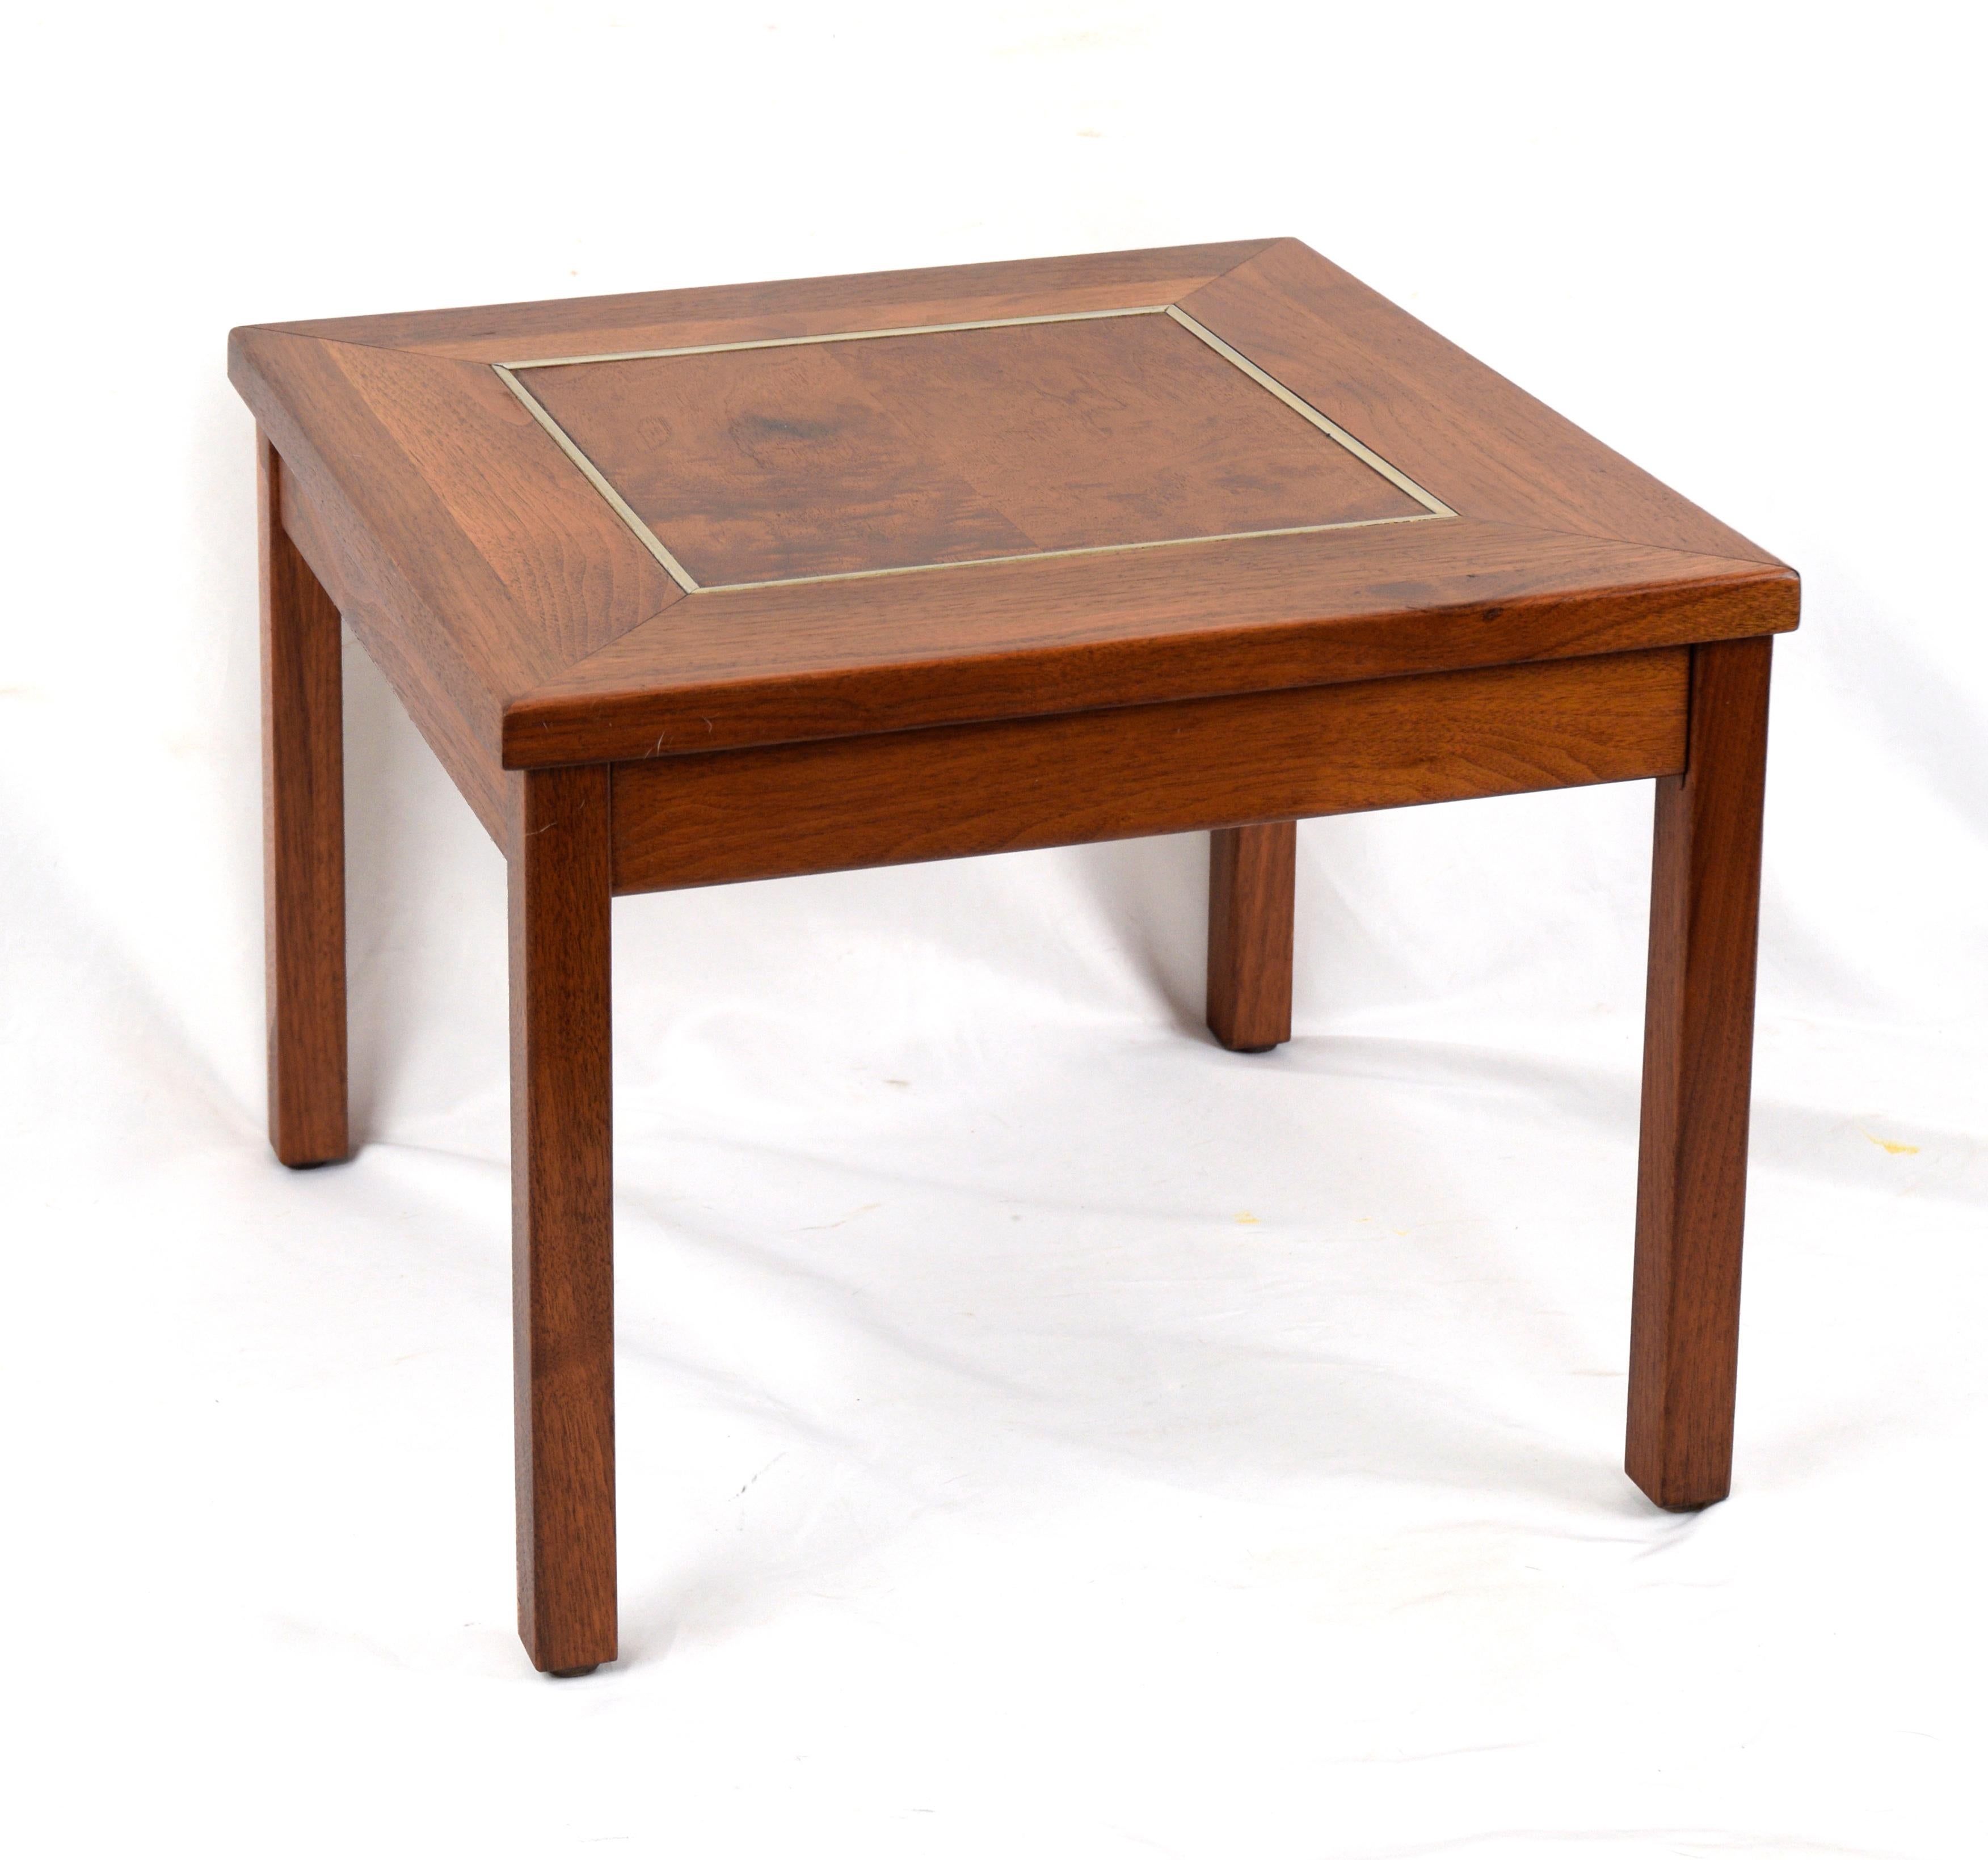 Brown Saltman Solid Walnut End Table with Burl Walnut Inset

Elegant end table designed by John Keal and manufactured by Brown Saltman. This piece is clean and modern, which highlights the gorgeous burl of the top. It will fit well with a variety of